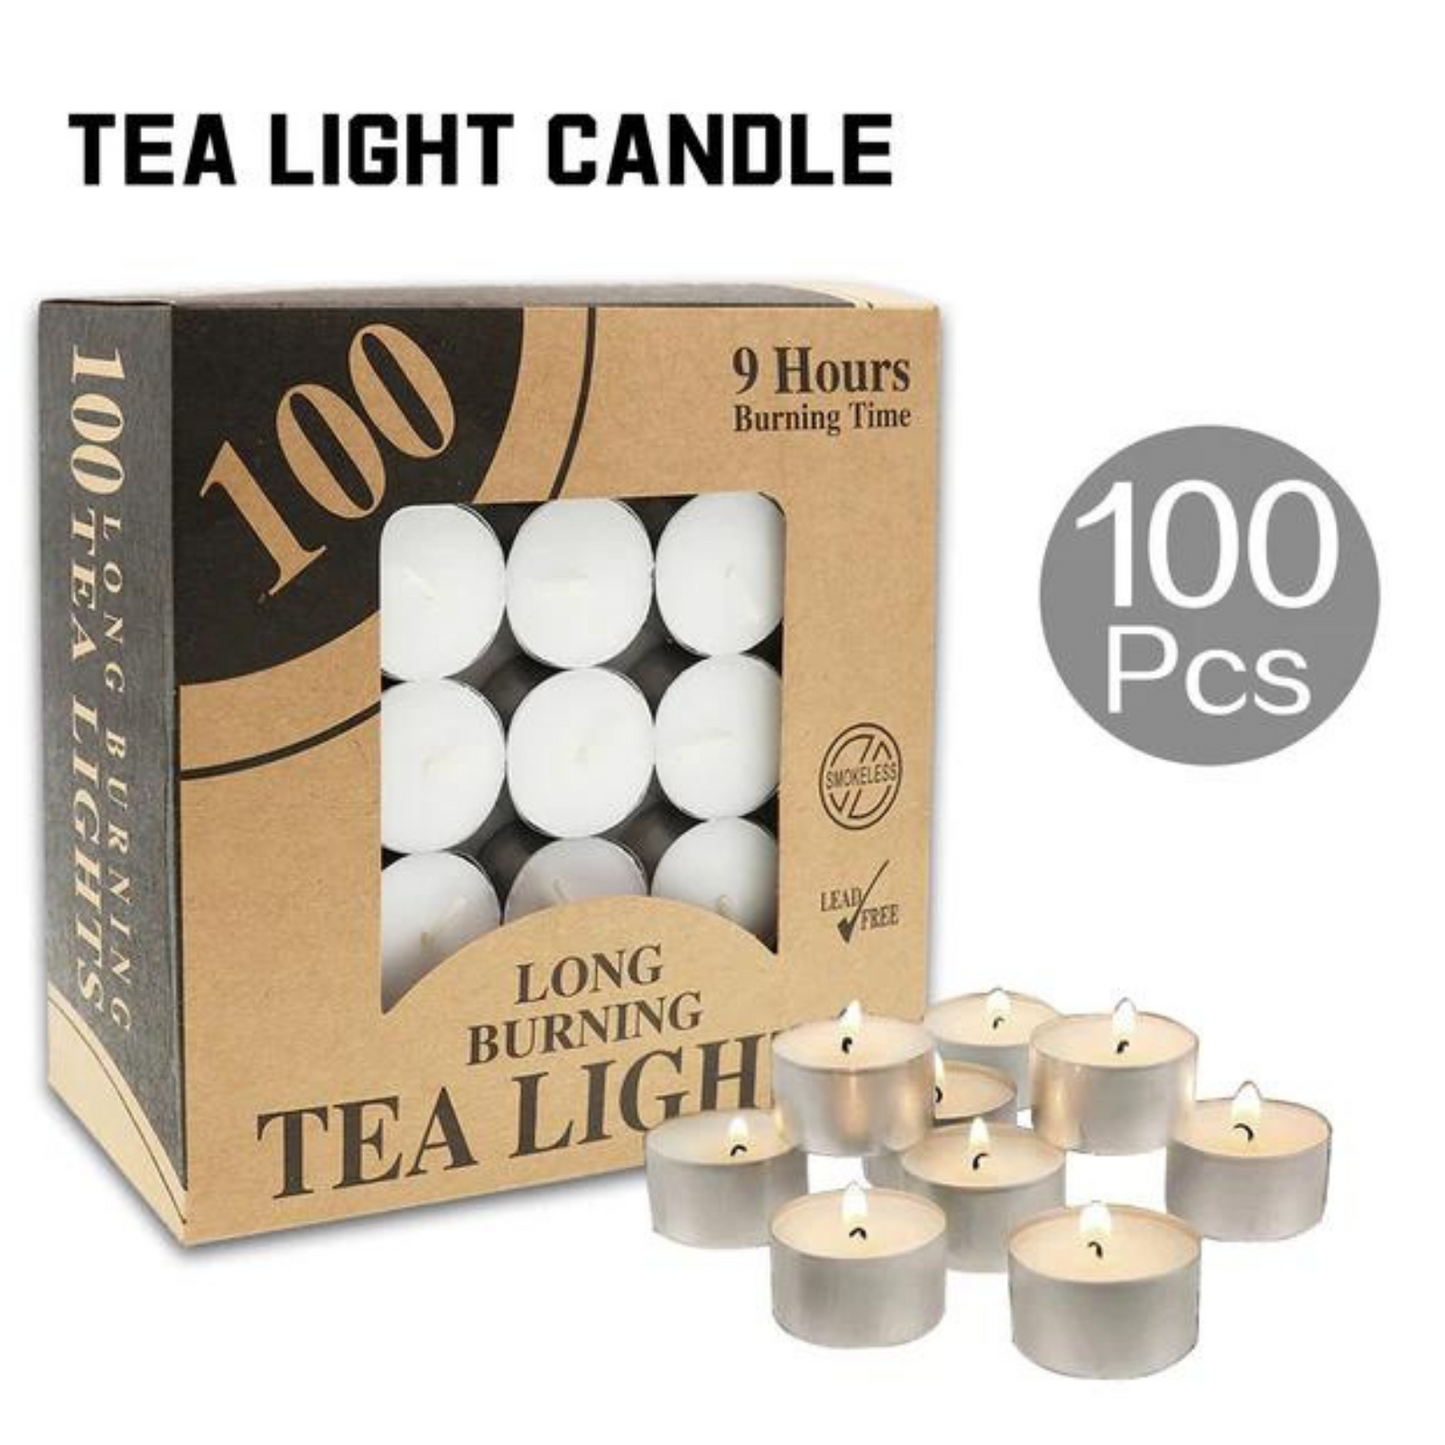 9 hours Tealight 100Pack Candles Tea Light Candle Home Party Wedding